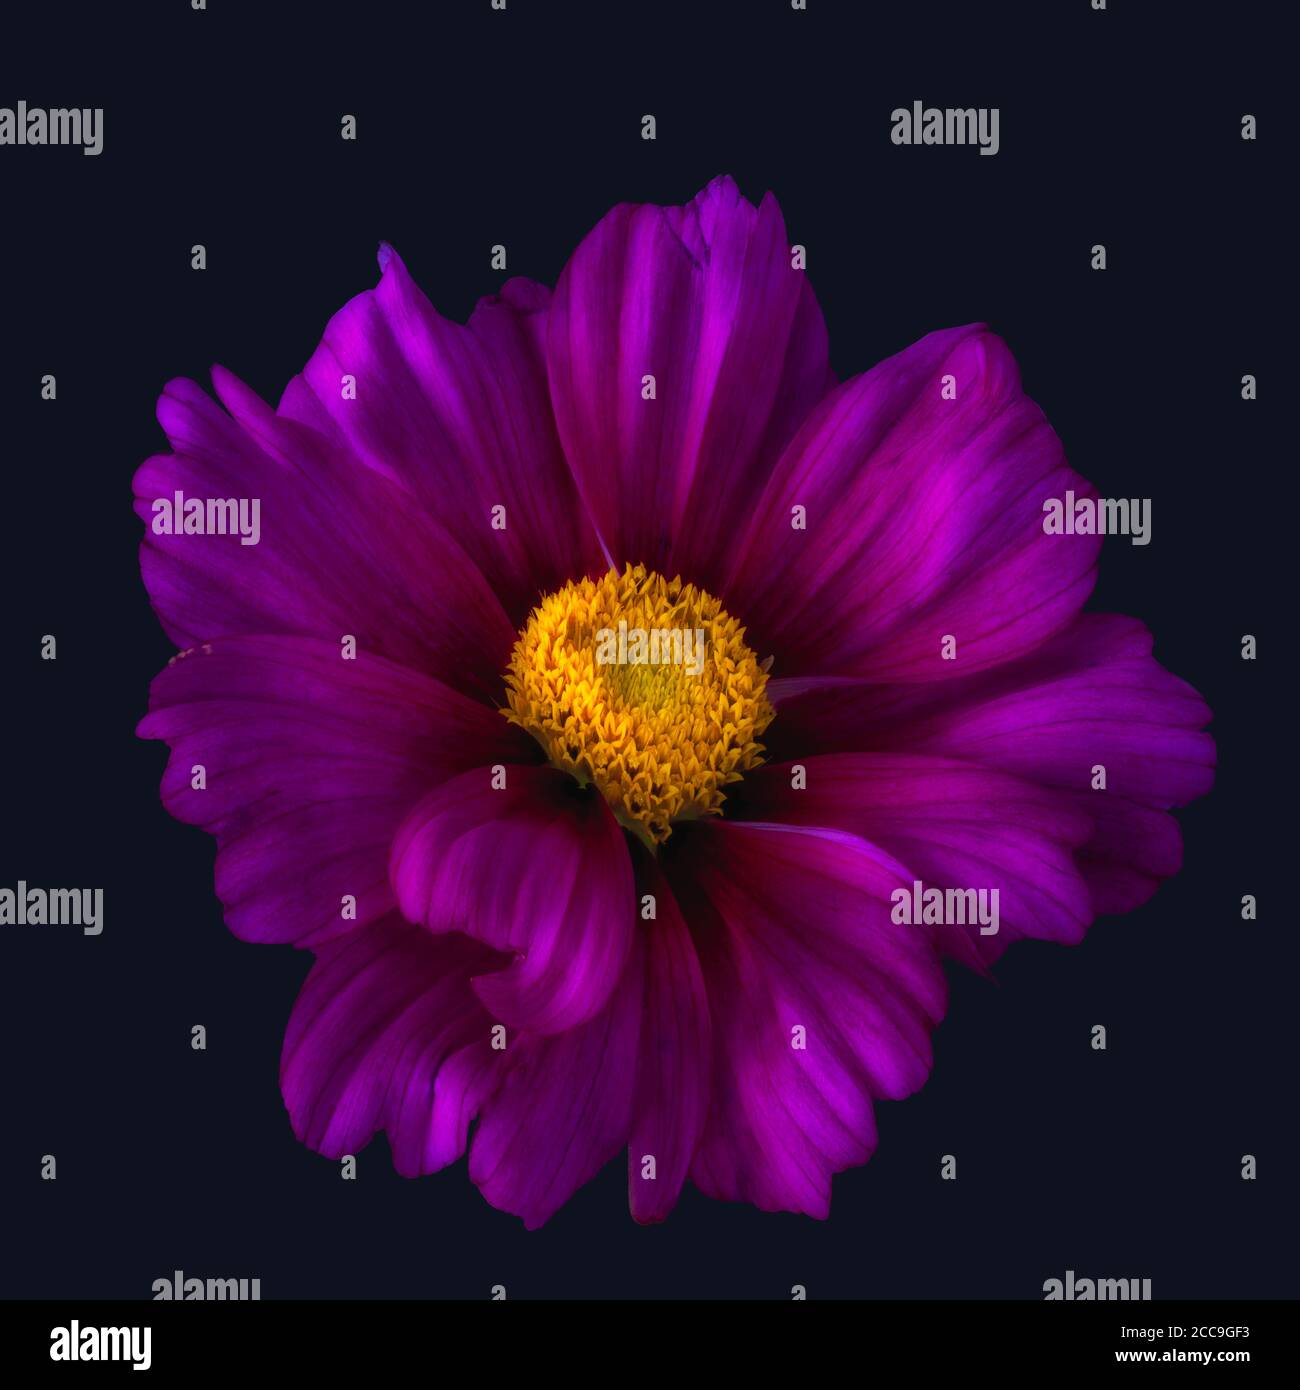 Surrealistic closeup of a single isolated wide open glowing violet cosmos blossom on dark blue background Stock Photo